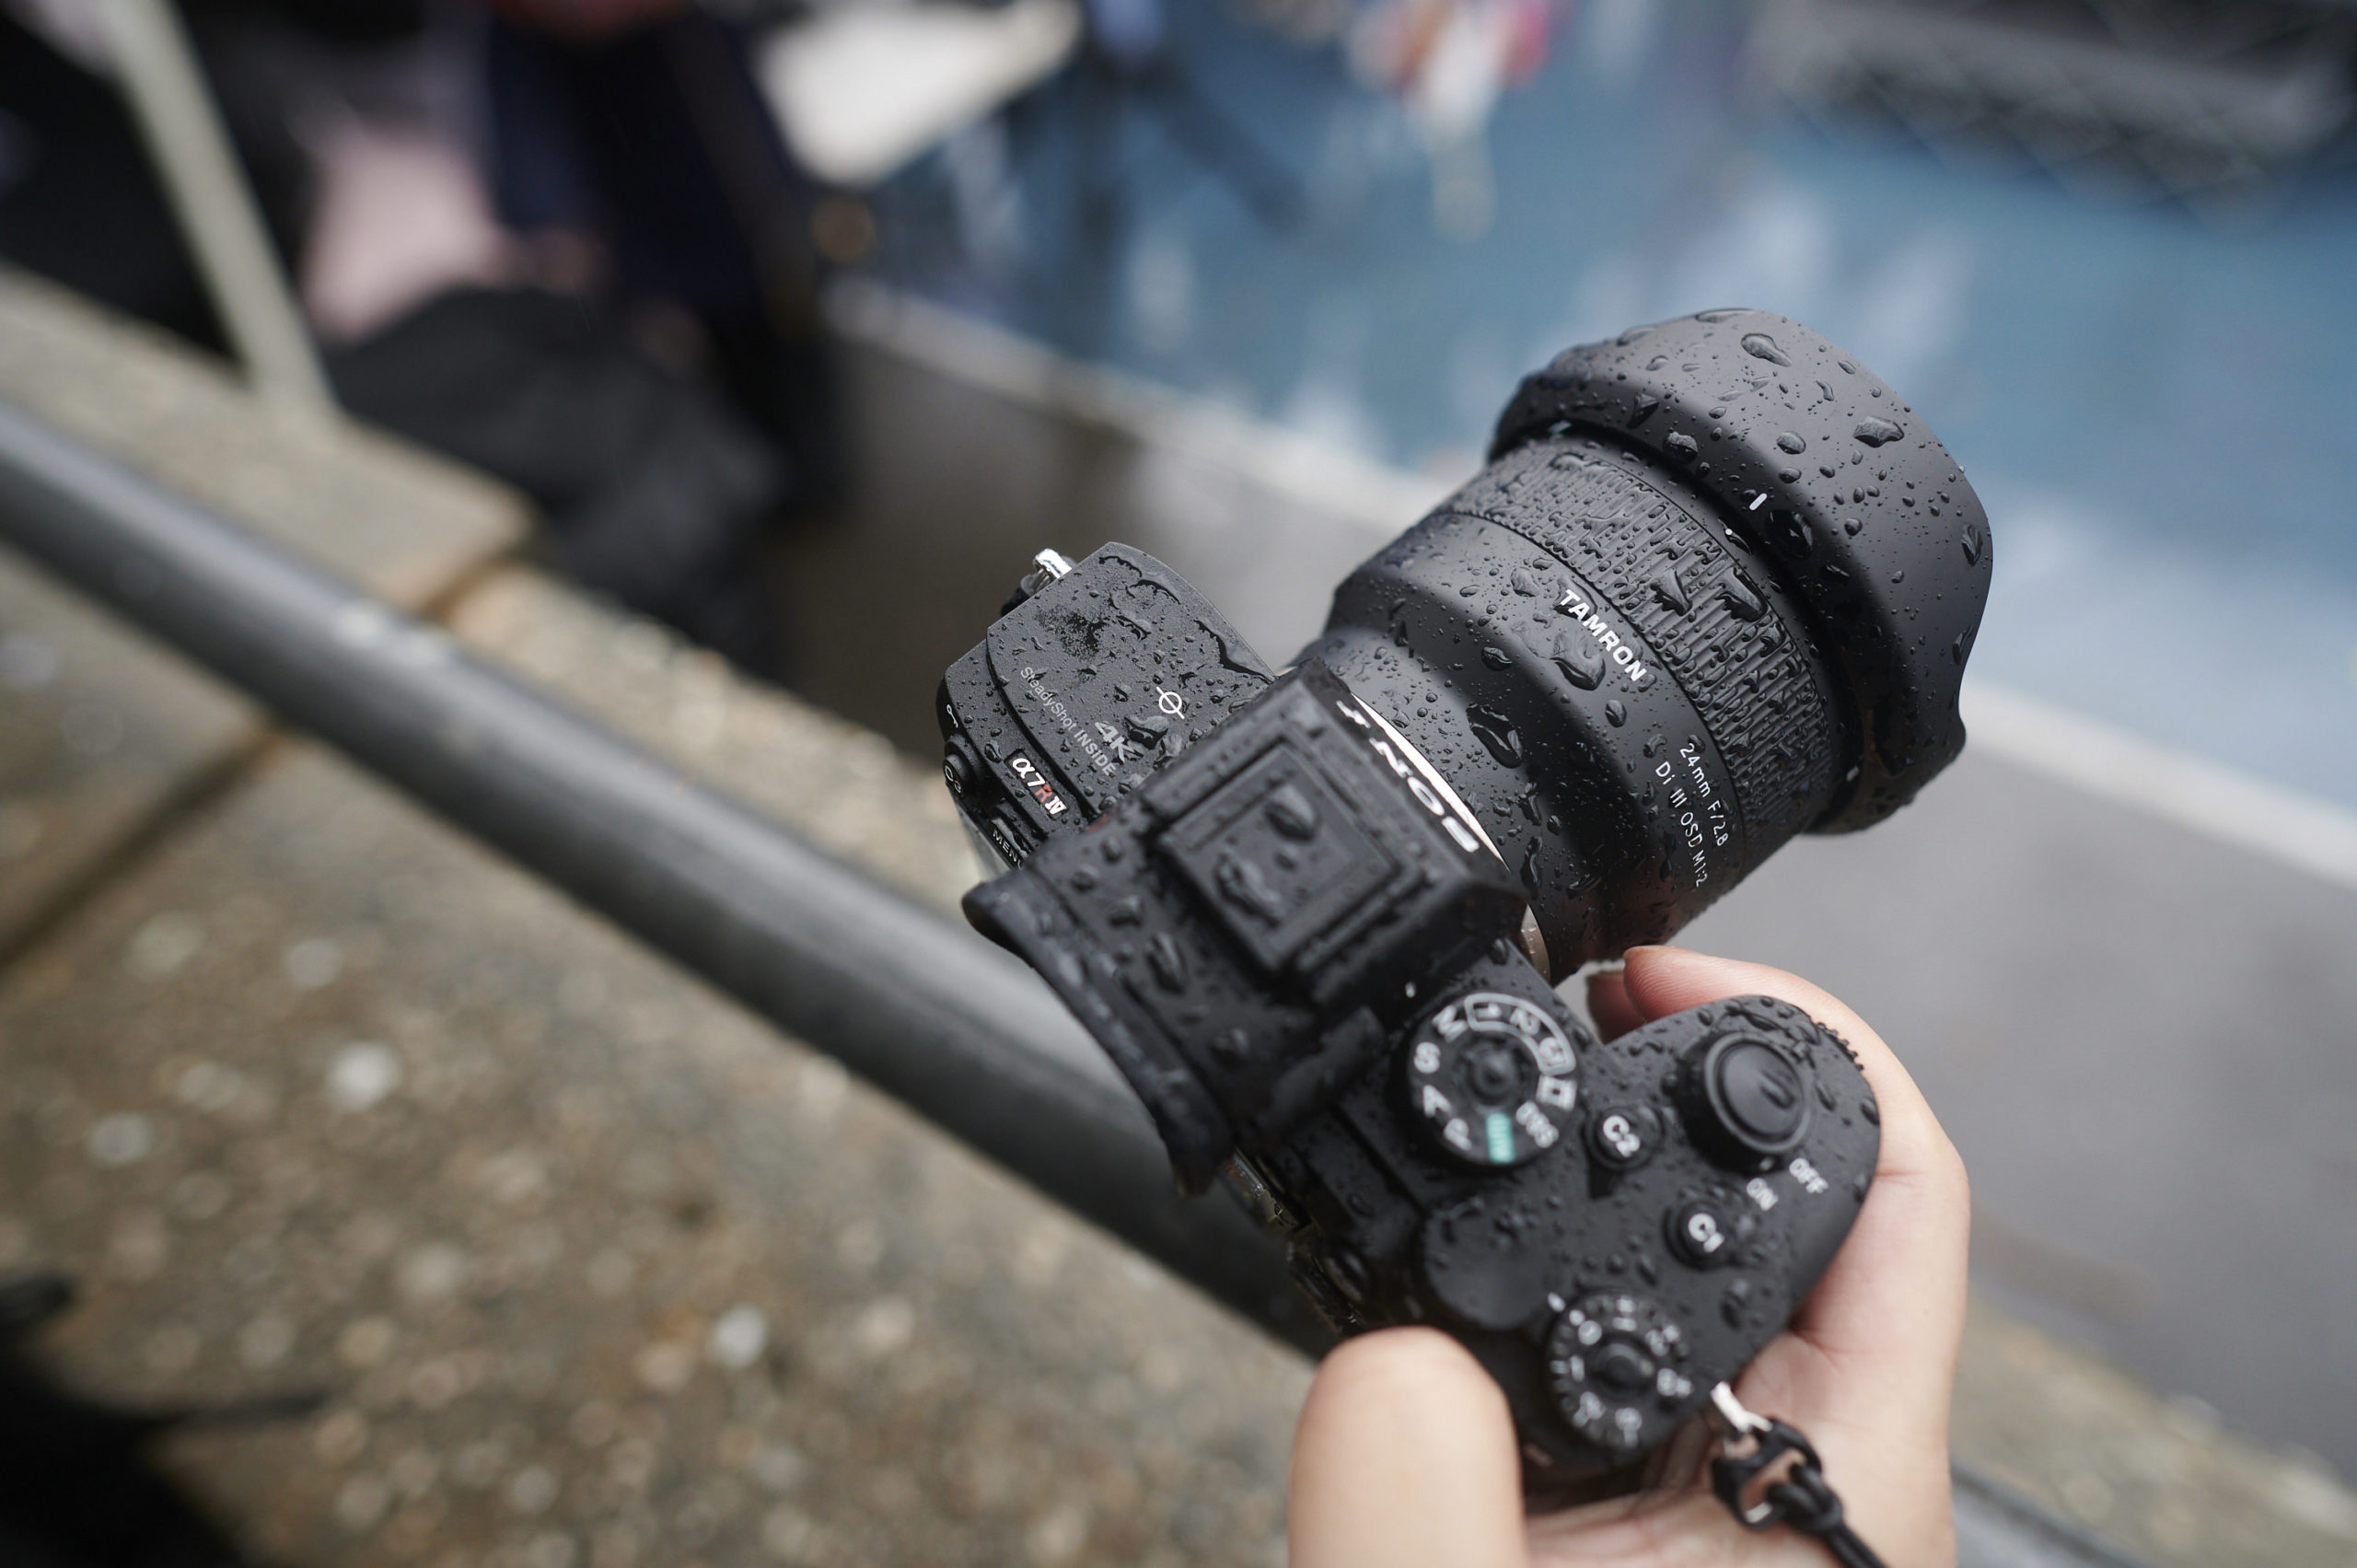 No, Your Camera Is Not Waterproof. It’s Protected, Maybe.